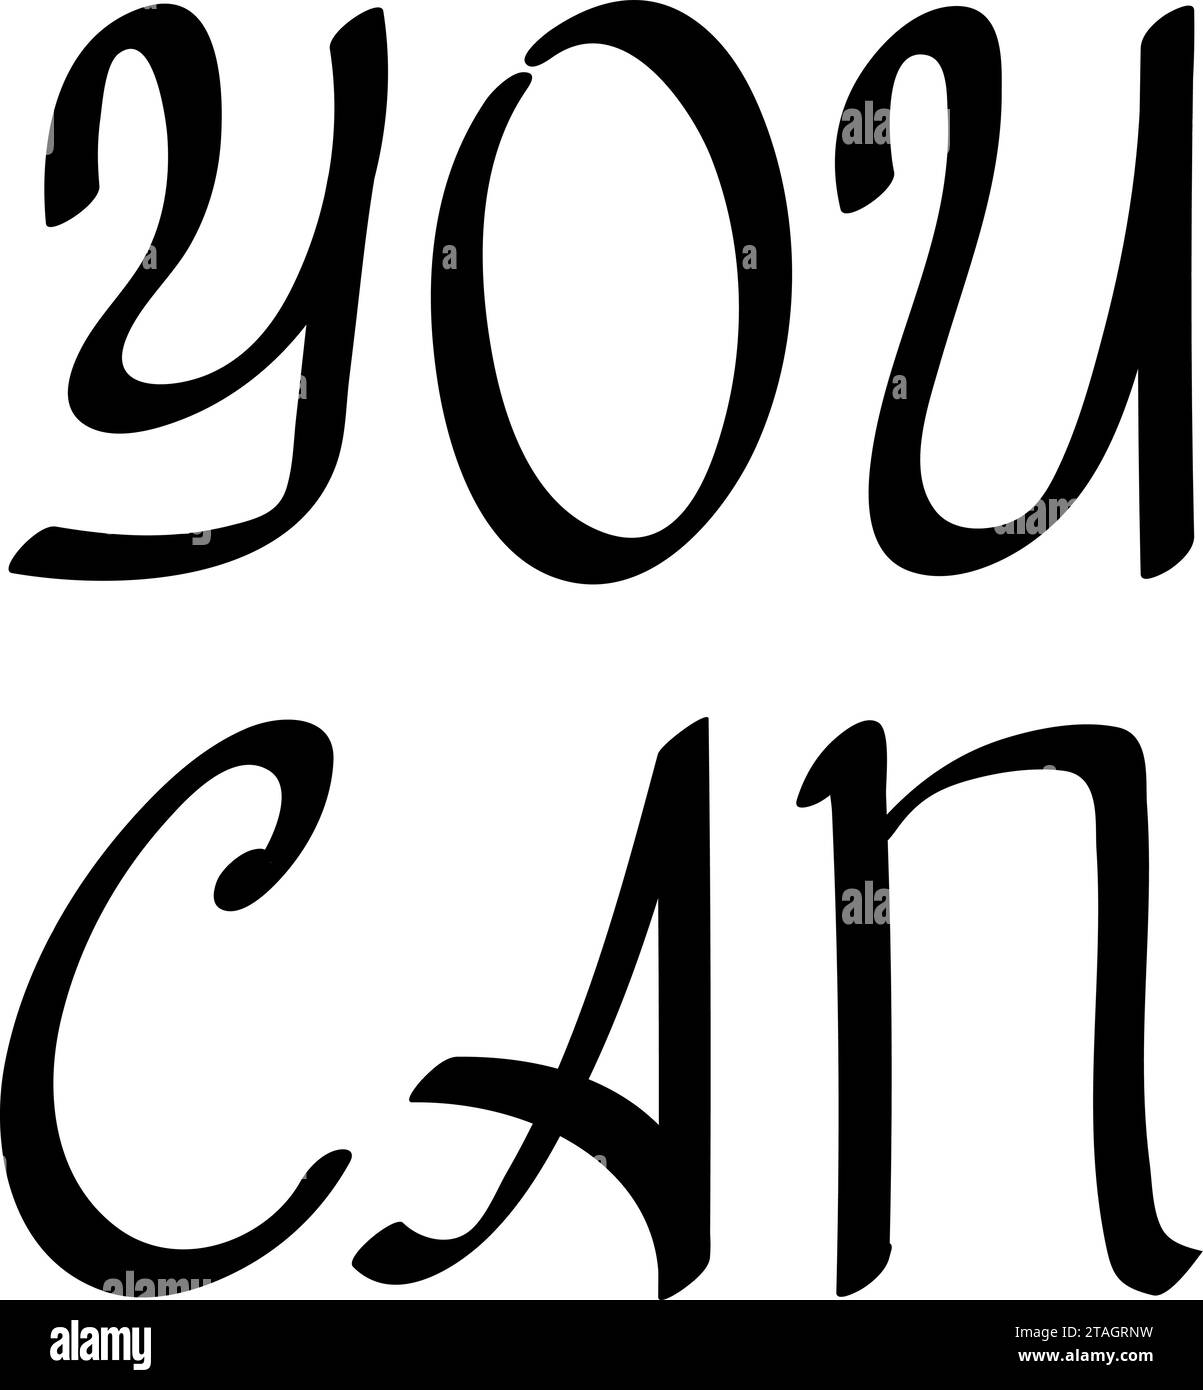 Yes You Can motivational phrase. Modern calligraphy template for T